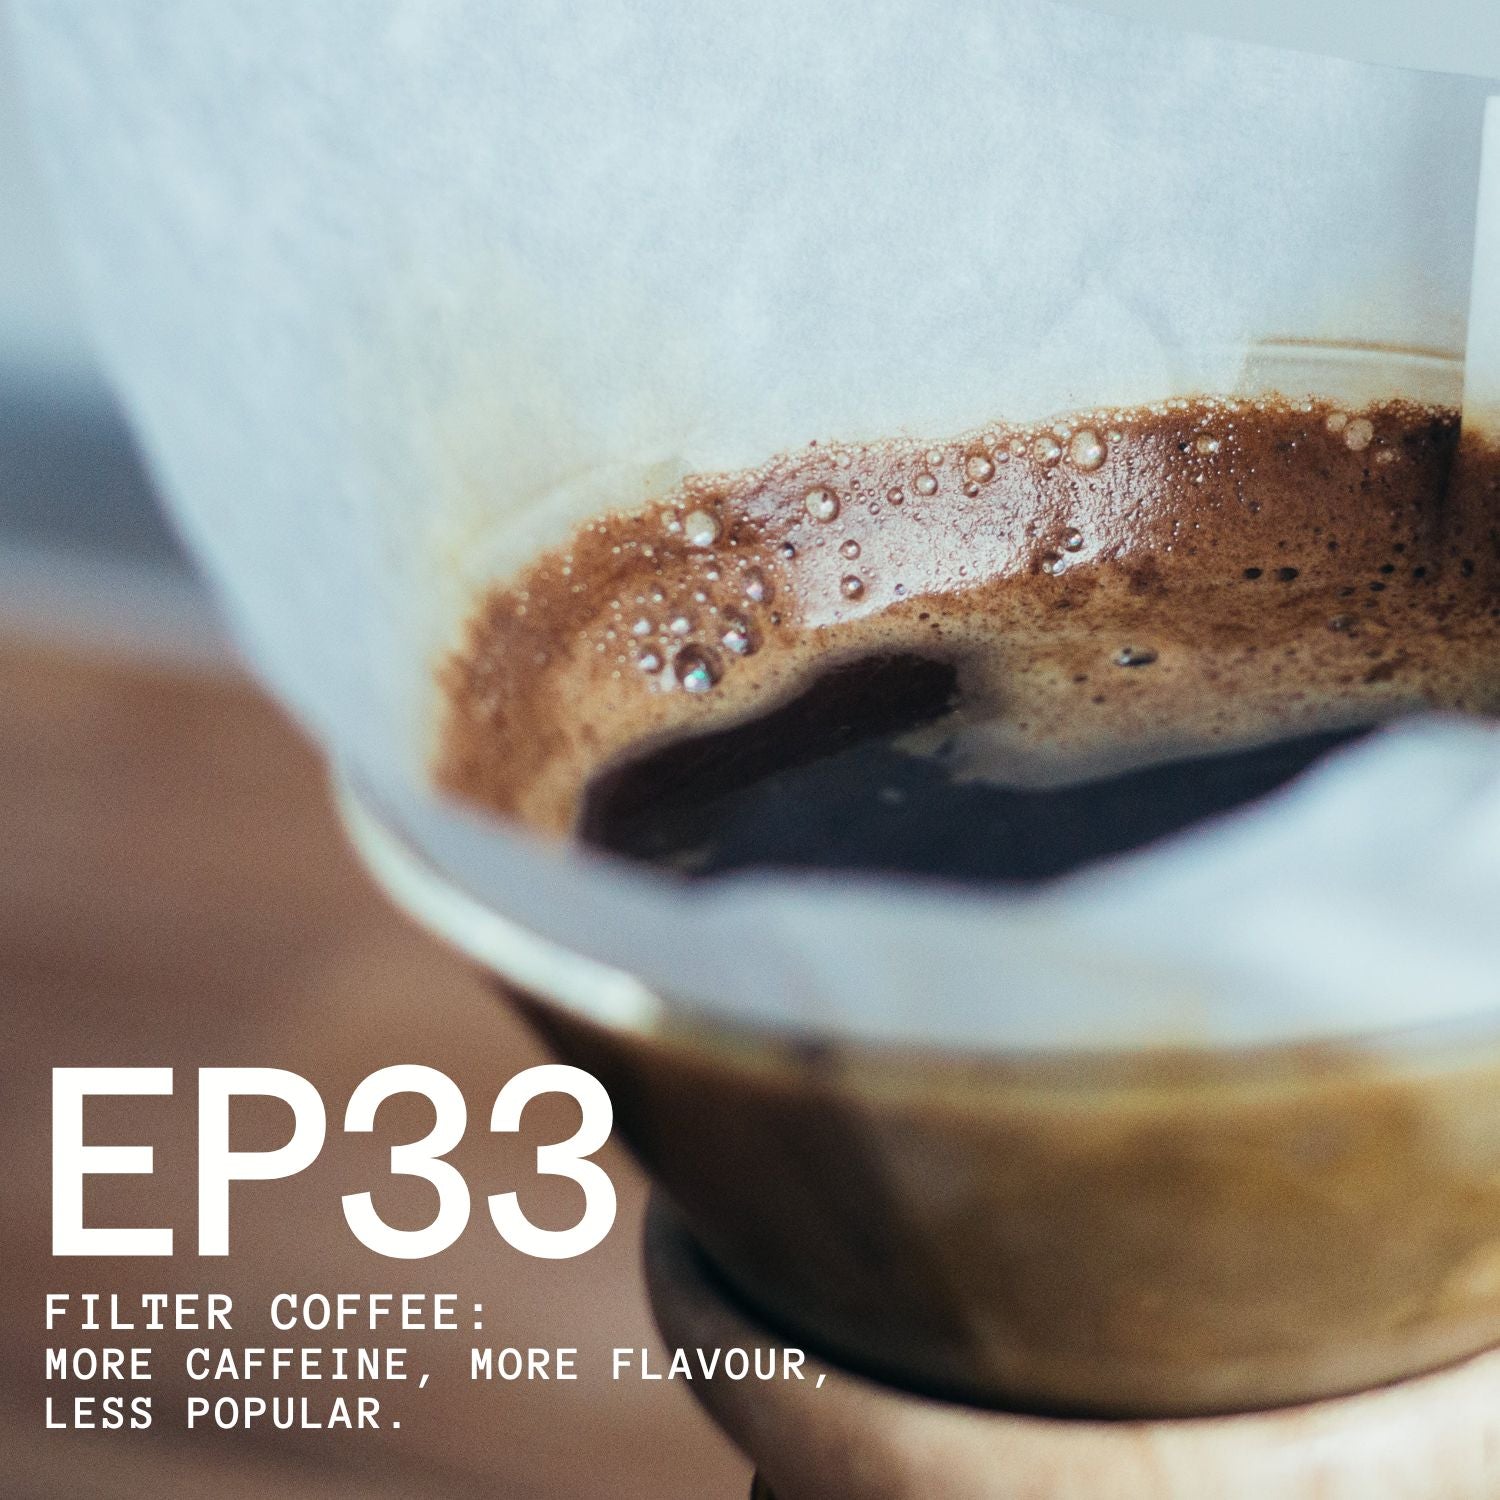 Episode 33 - Filter Coffee: More Caffeine, More Flavour, Less Popular.